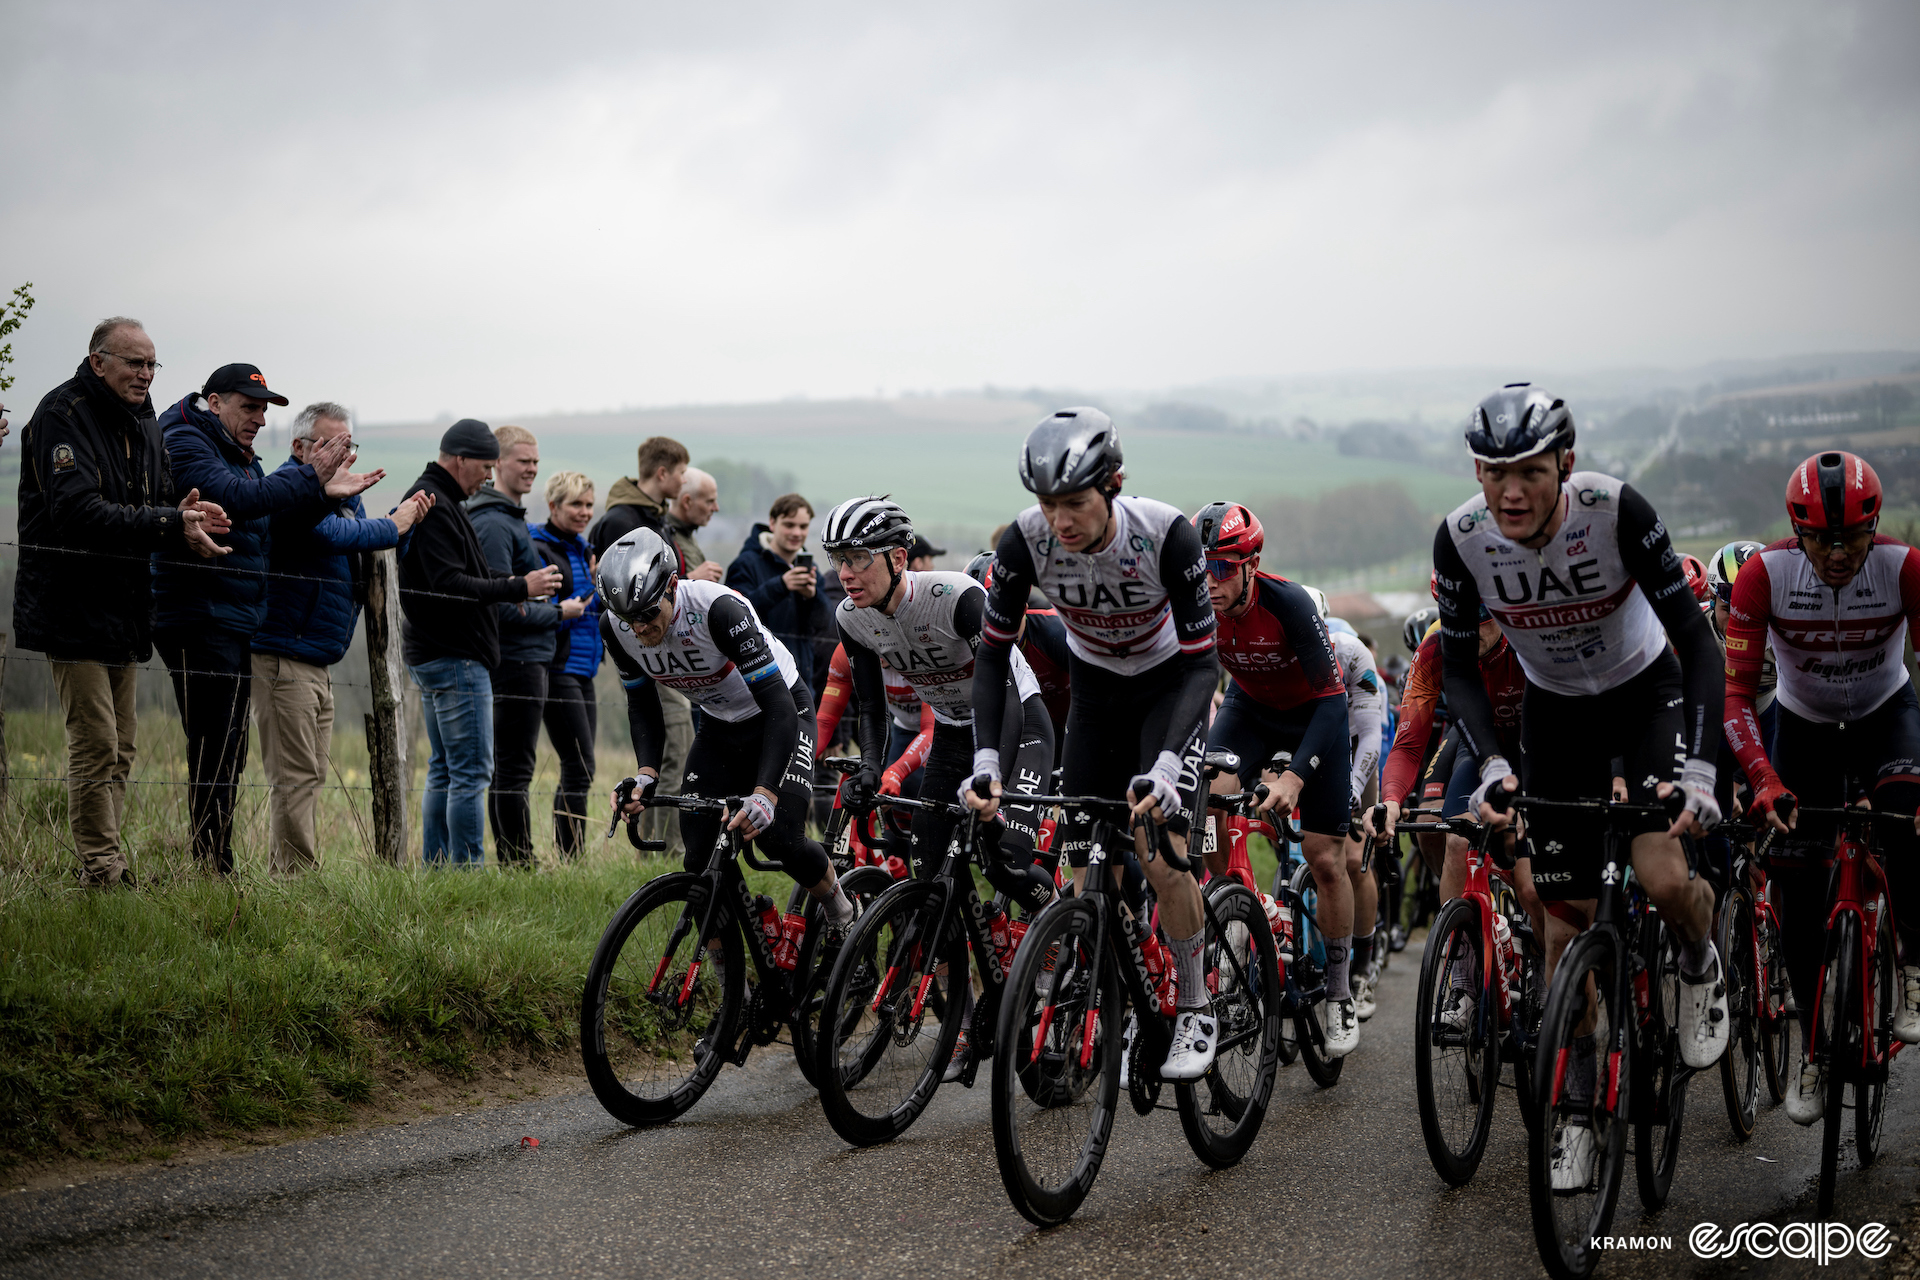 UAE Team Emirates rode strongly for Pogačar at the spring classics. Here, the whole team is spread out across the front of the pack on a climb at Amstel Gold Race, on a cold, grey, wet day.